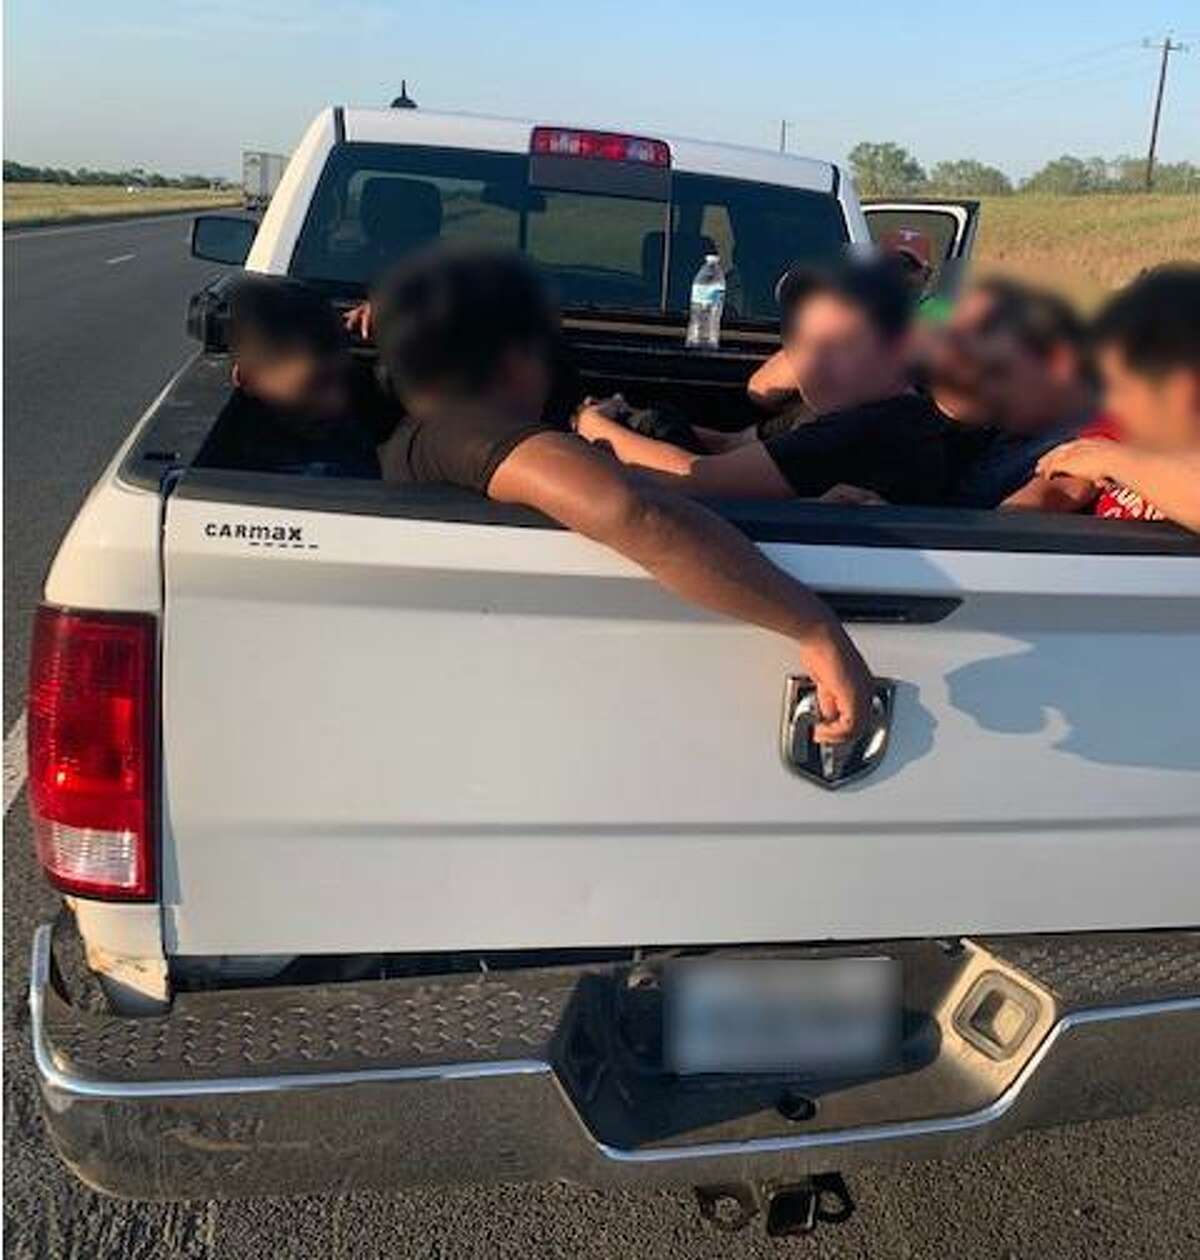 U.S. Border Patrol agents and Encinal Police Department officers halted a smuggling attempt of nine immigrants who had crossed the border illegally.